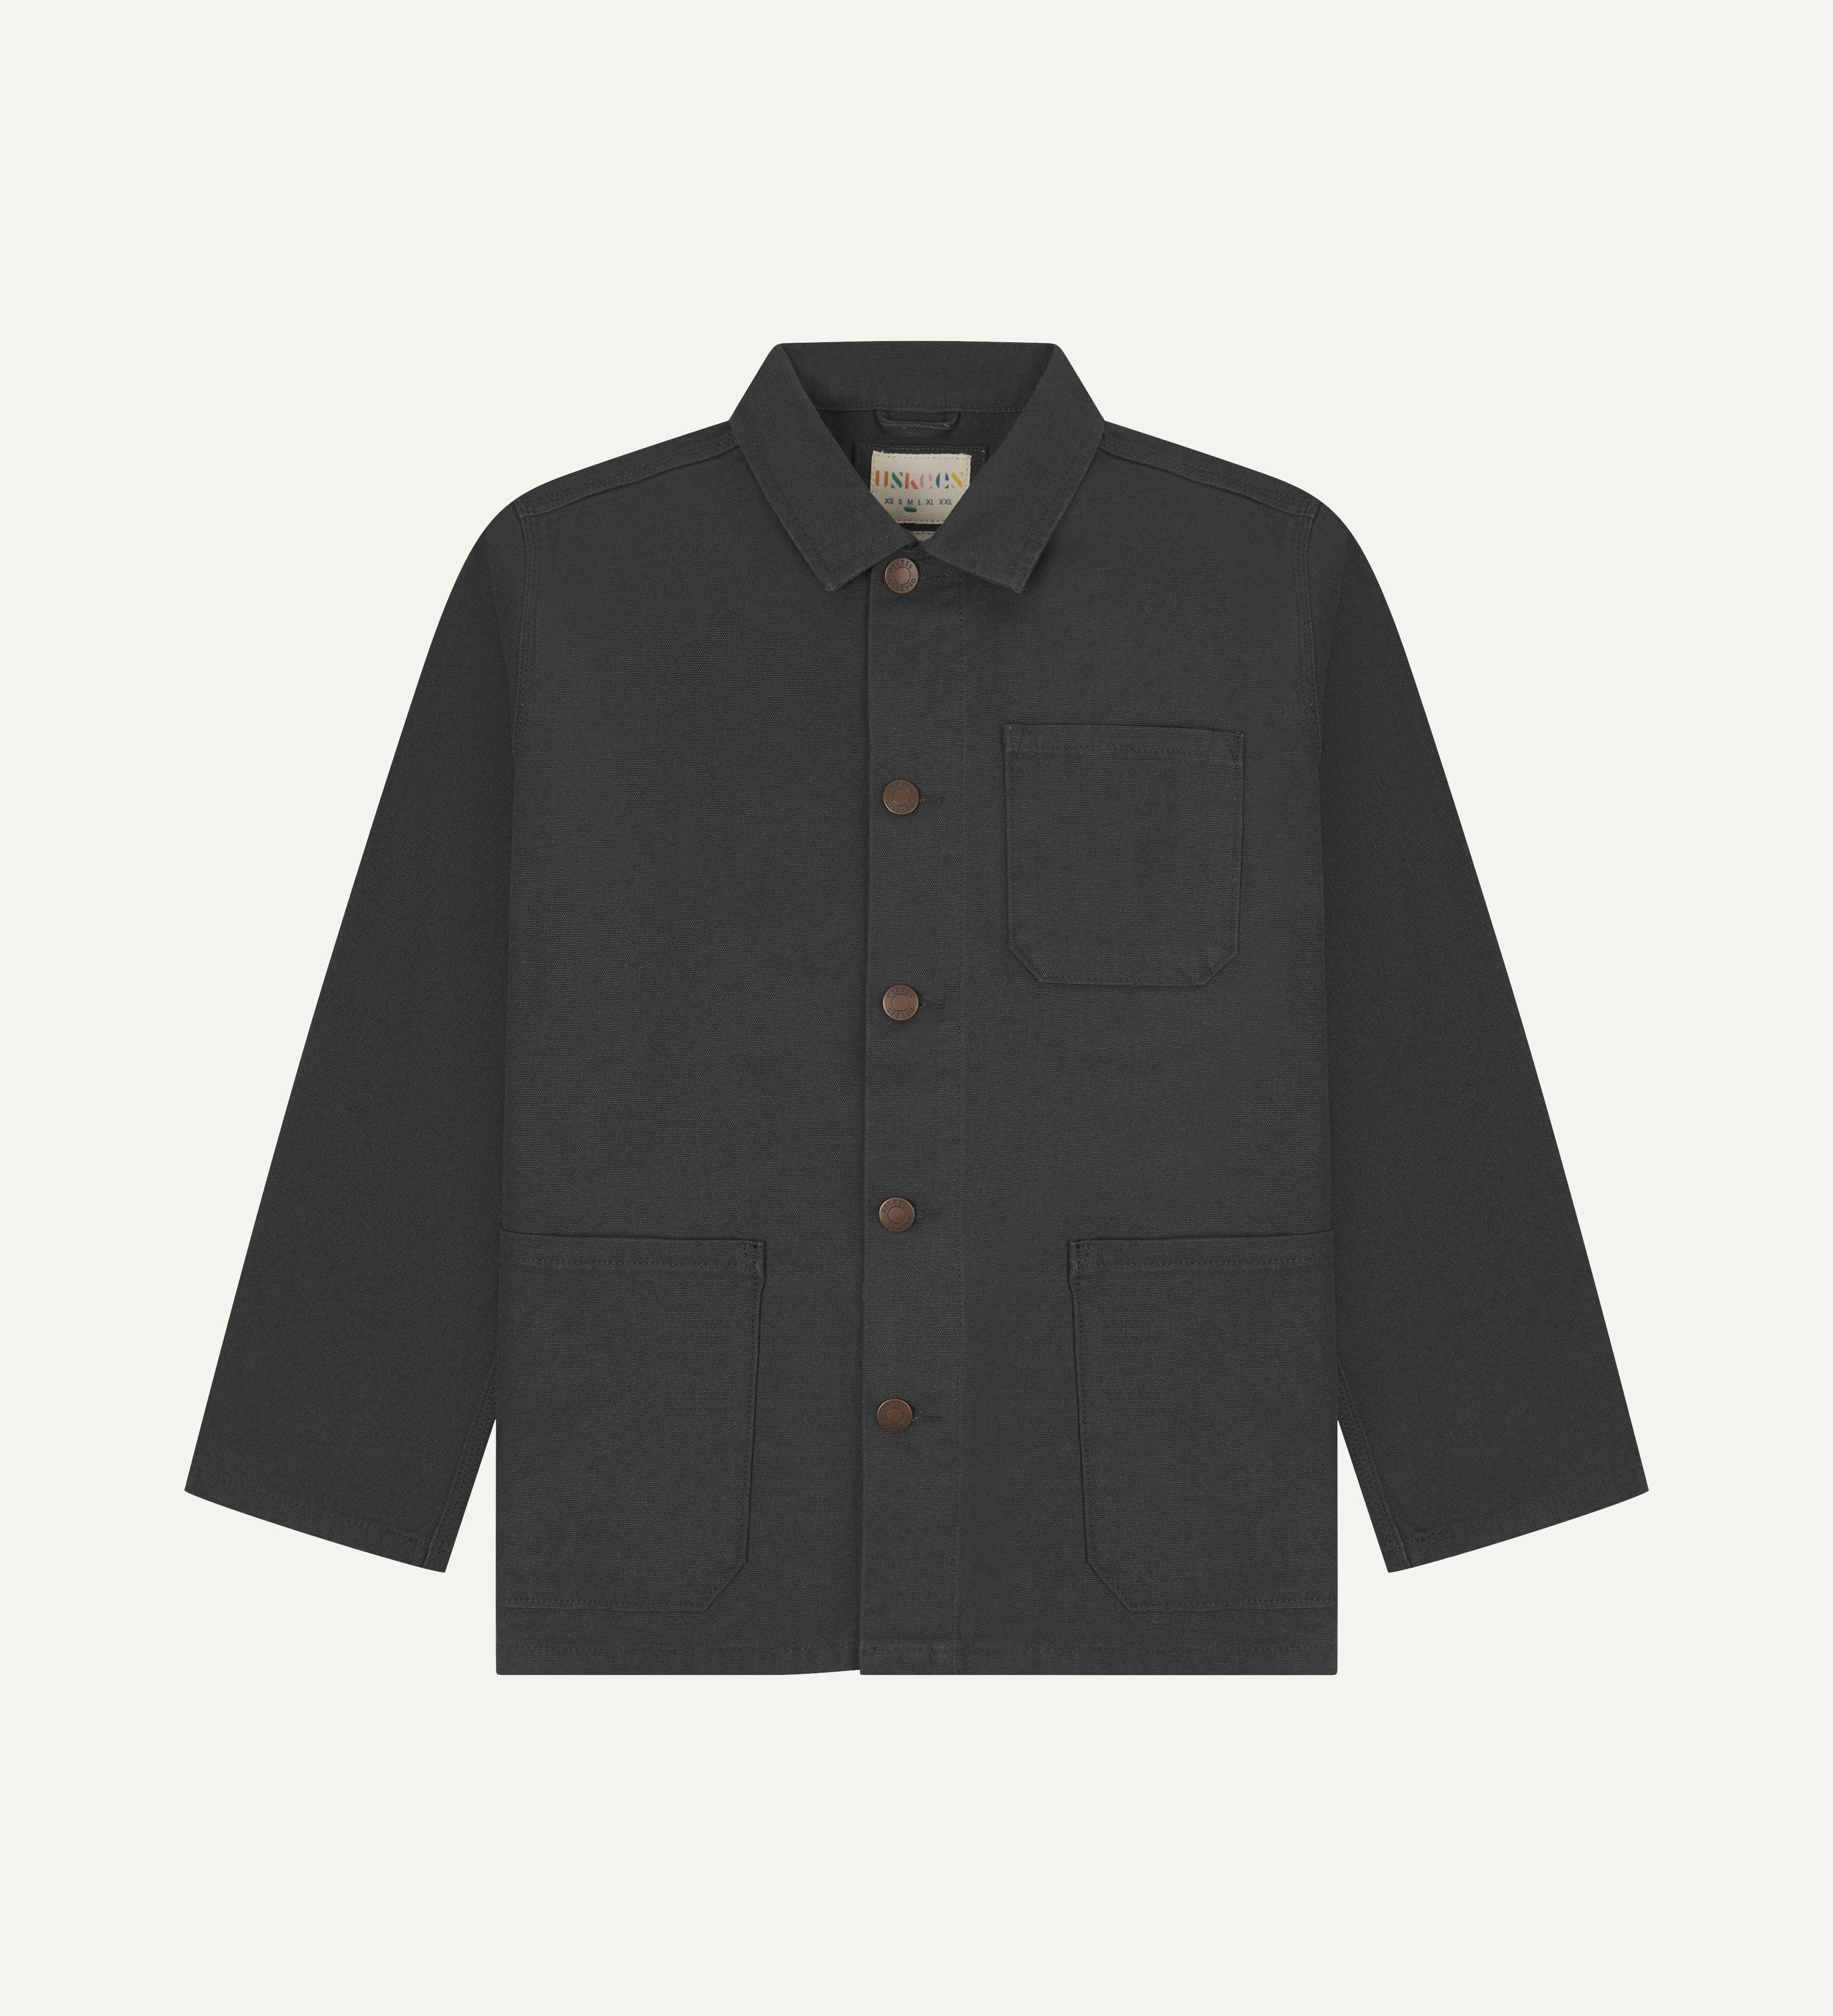 Front view of uskees dark grey canvas men's overshirt presented buttoned up showing the 3 front pockets.